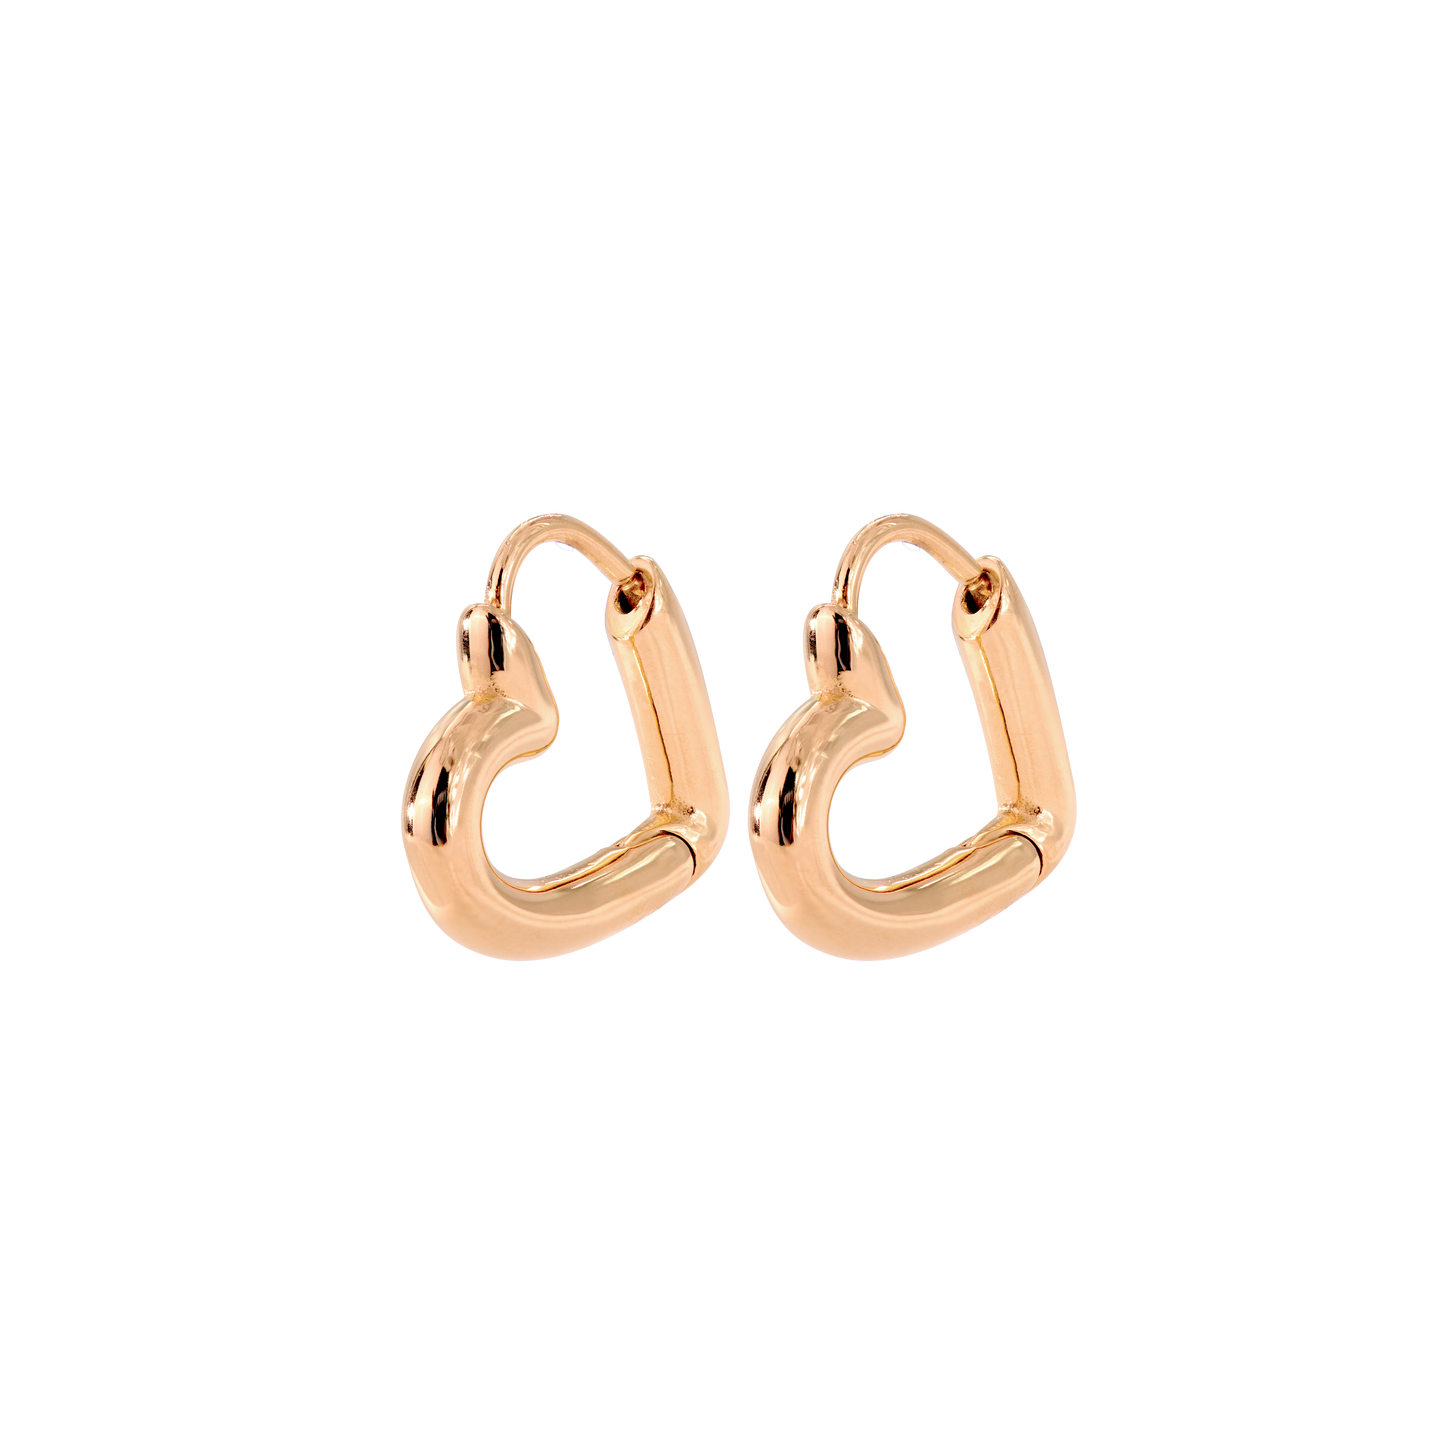 Phat Heart Hoops Small Rose Gold